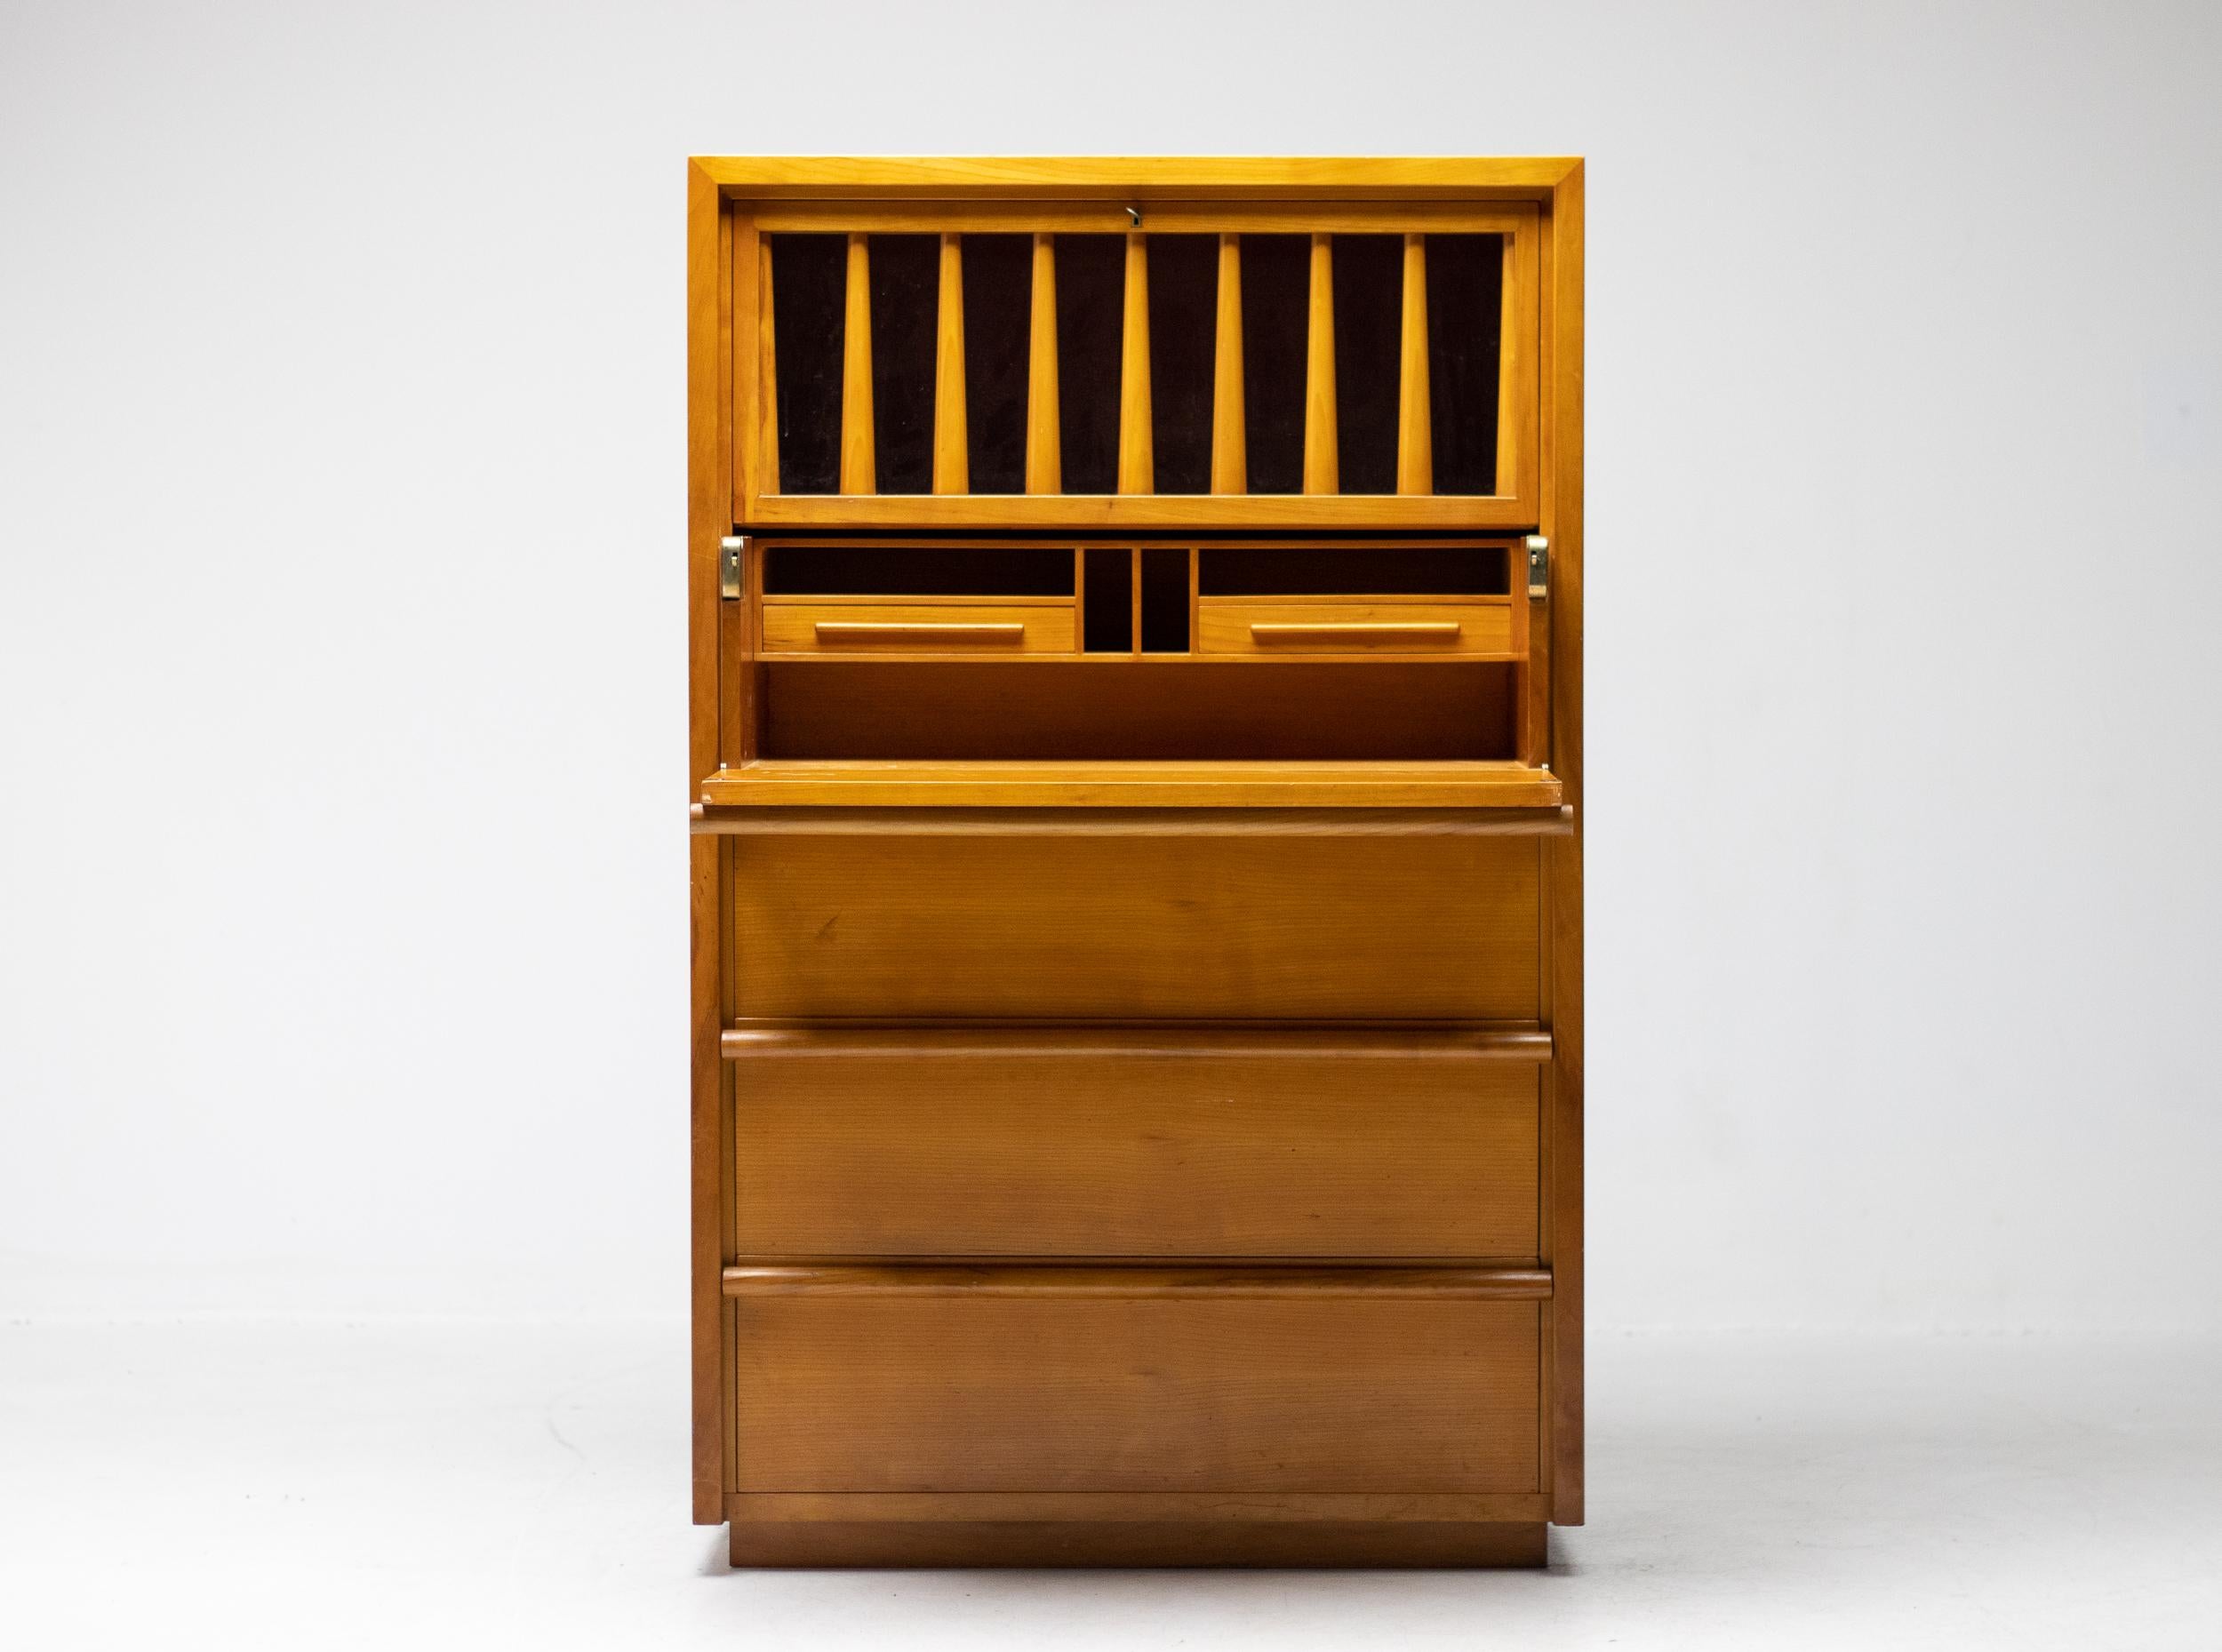 Elegant drop front desk secretary in solid cherry, designed by T.H. Robsjohn-Gibbings for 't Woonhuys.
This design differs in quite a few details from the production version made by Widdicomb.
This is a one-off piece specially made for a Dutch villa